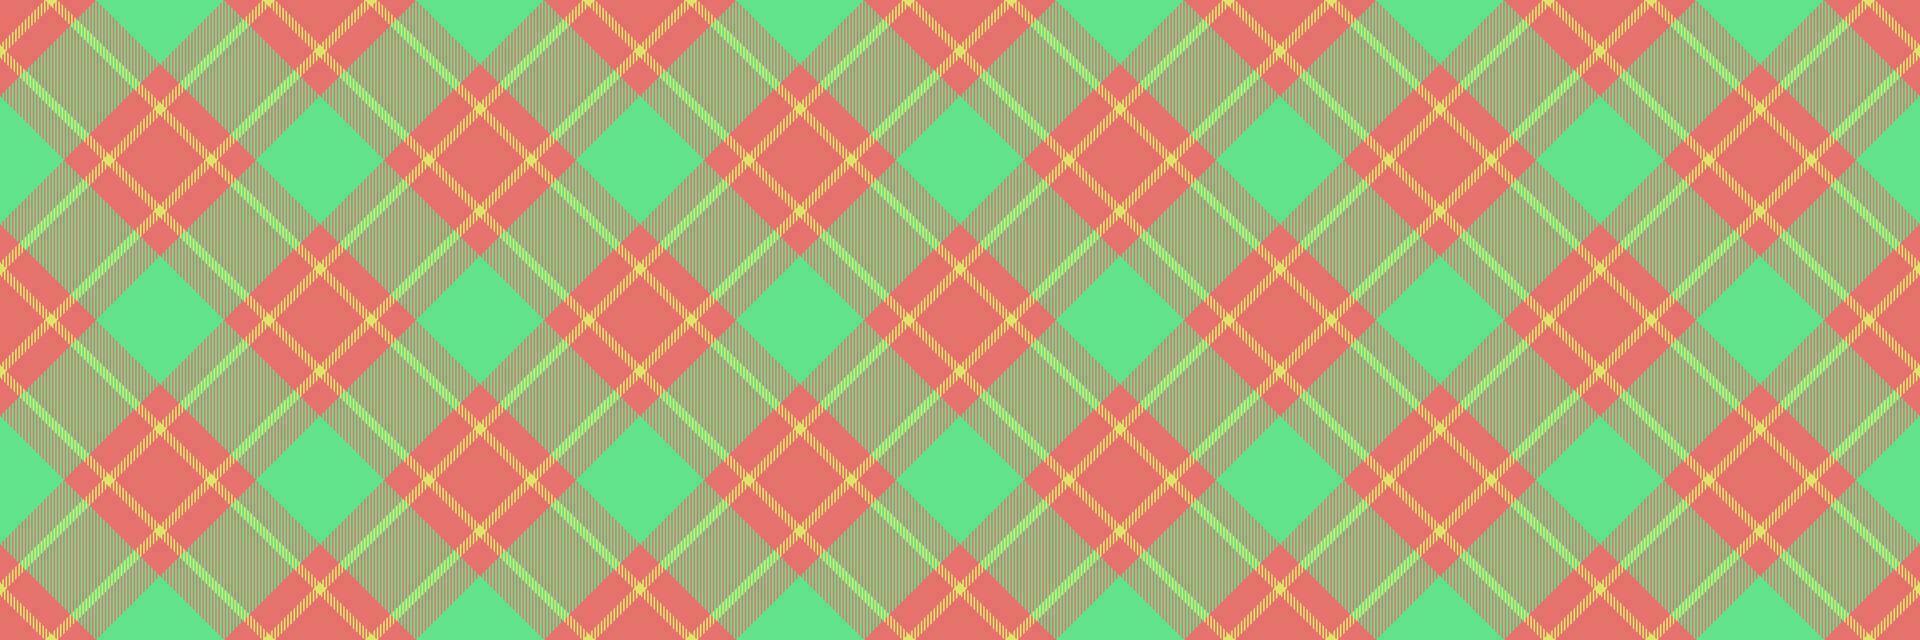 King check fabric vector, vibrant tartan textile plaid. Identity background seamless texture pattern in red and green colors. vector